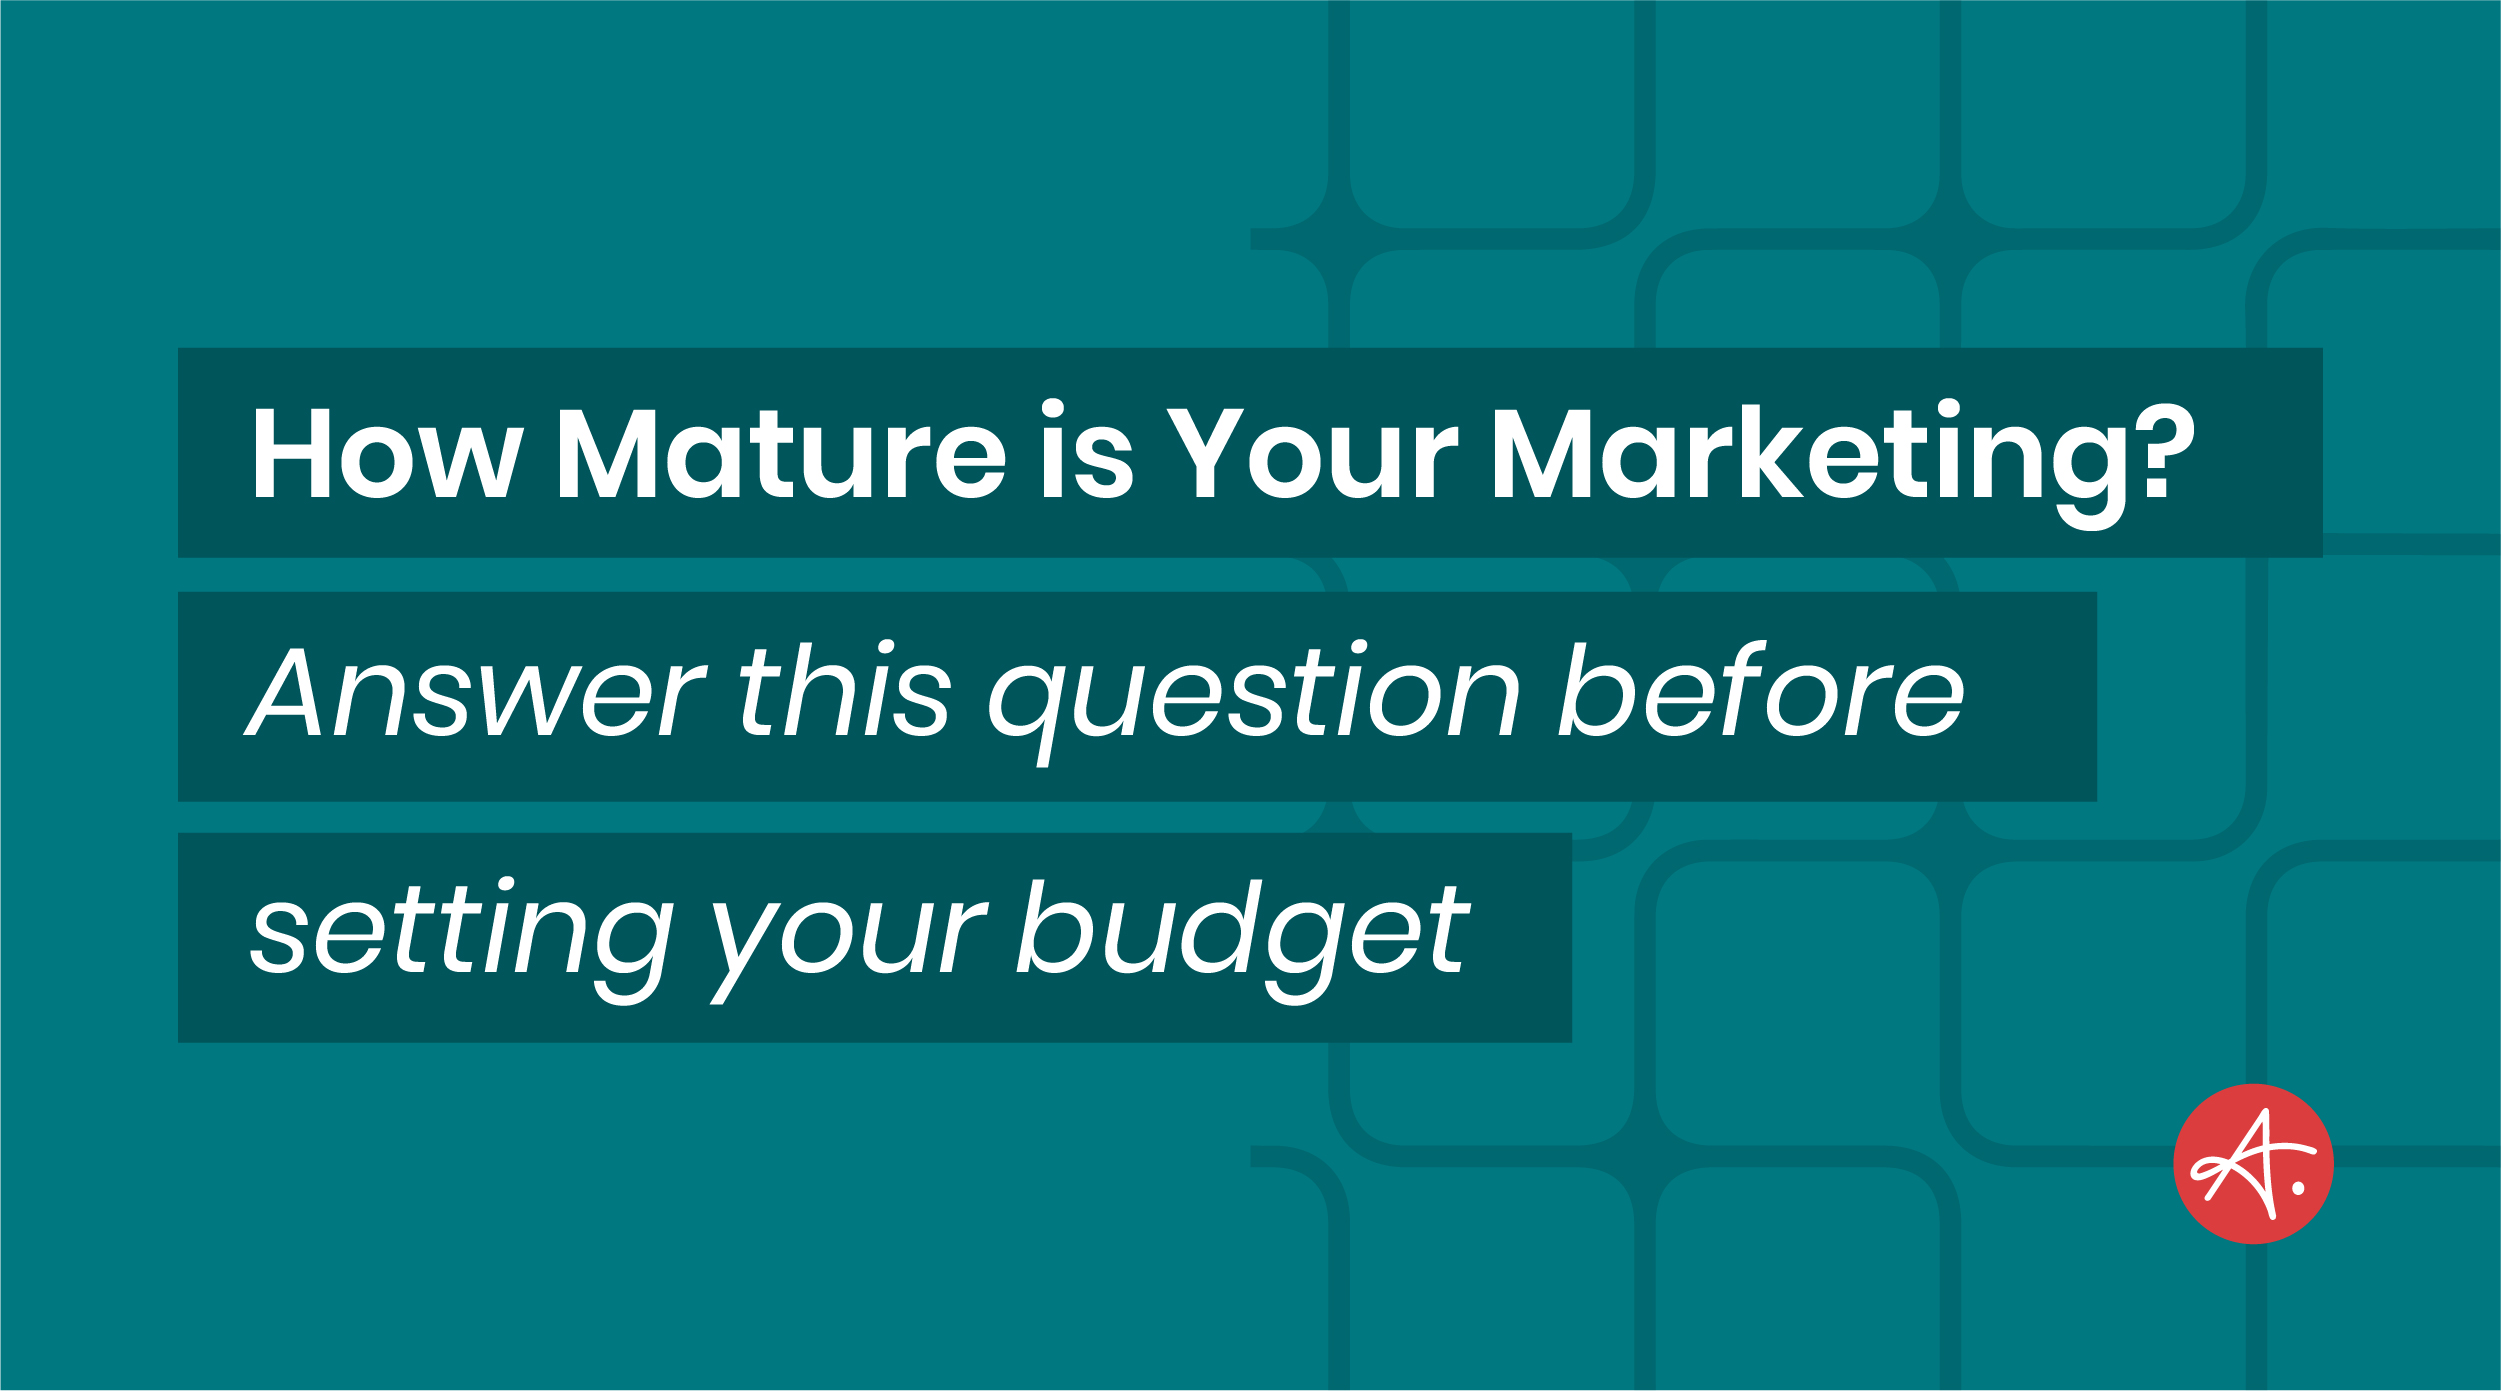 How mature is your marketing? Answer this question before setting your budget